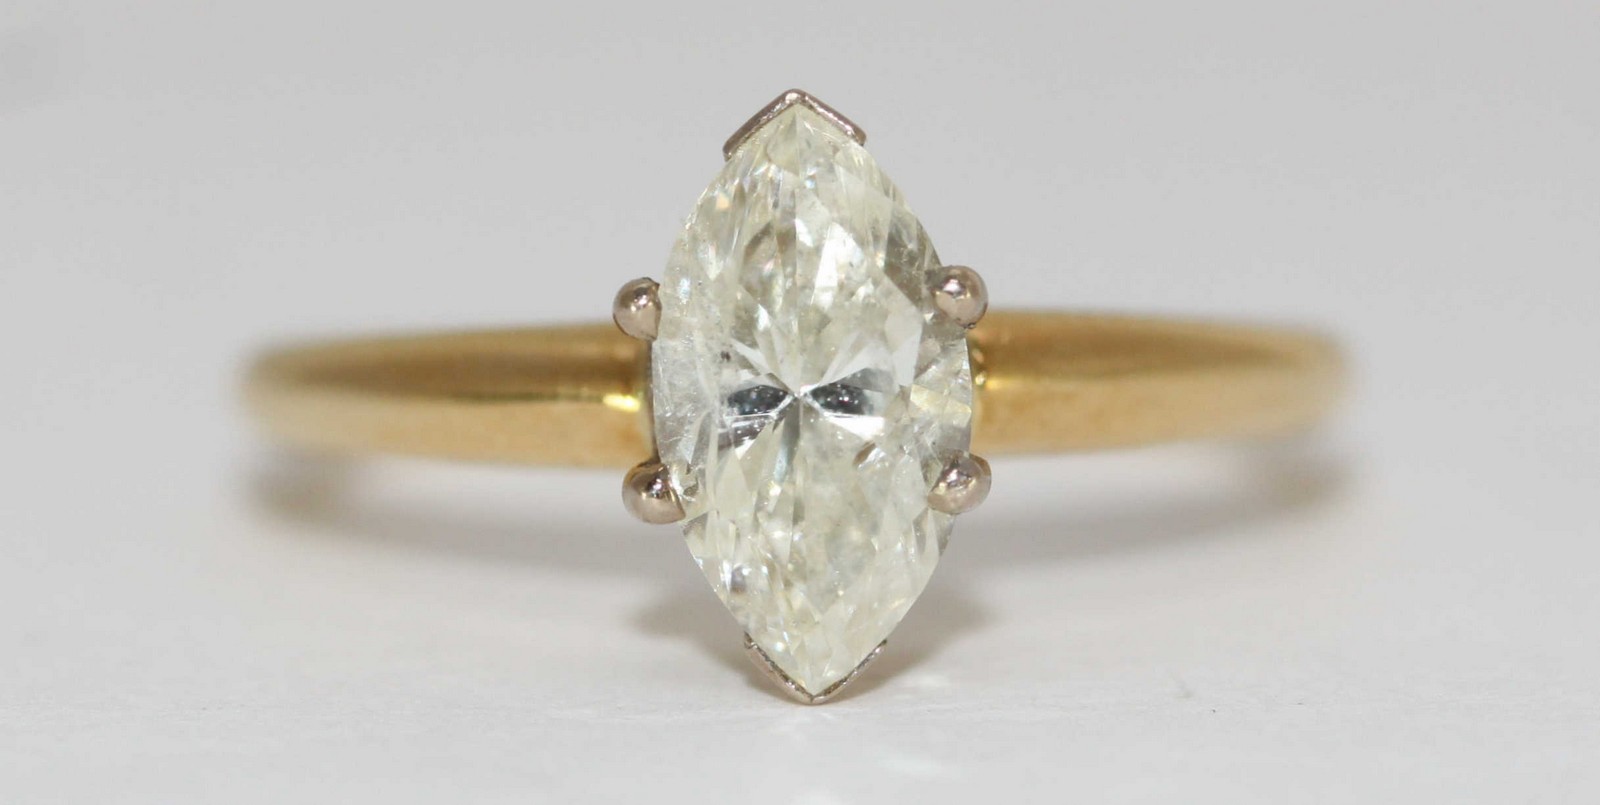 A ladies 18ct yellow gold and solitaire marquise-cut diamond ring, the claw-set marquise diamond